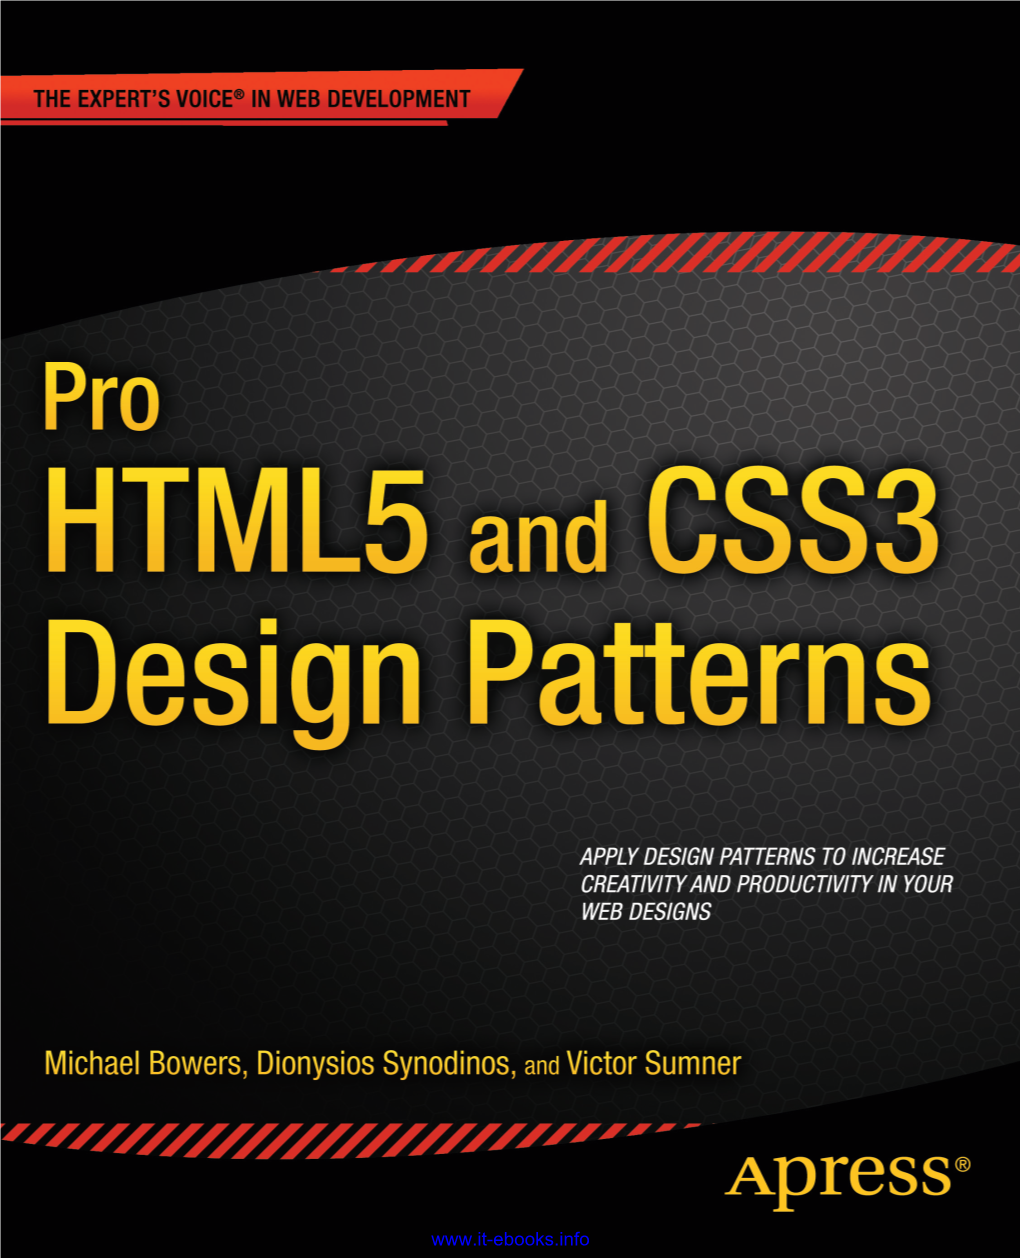 Pro HTML5 and CSS3 Design Patterns Pro HTML5 and CSS3 Design Patterns Features 350 Patterns That You Can Easily Use to Style Web Pages with CSS3 and HTML5